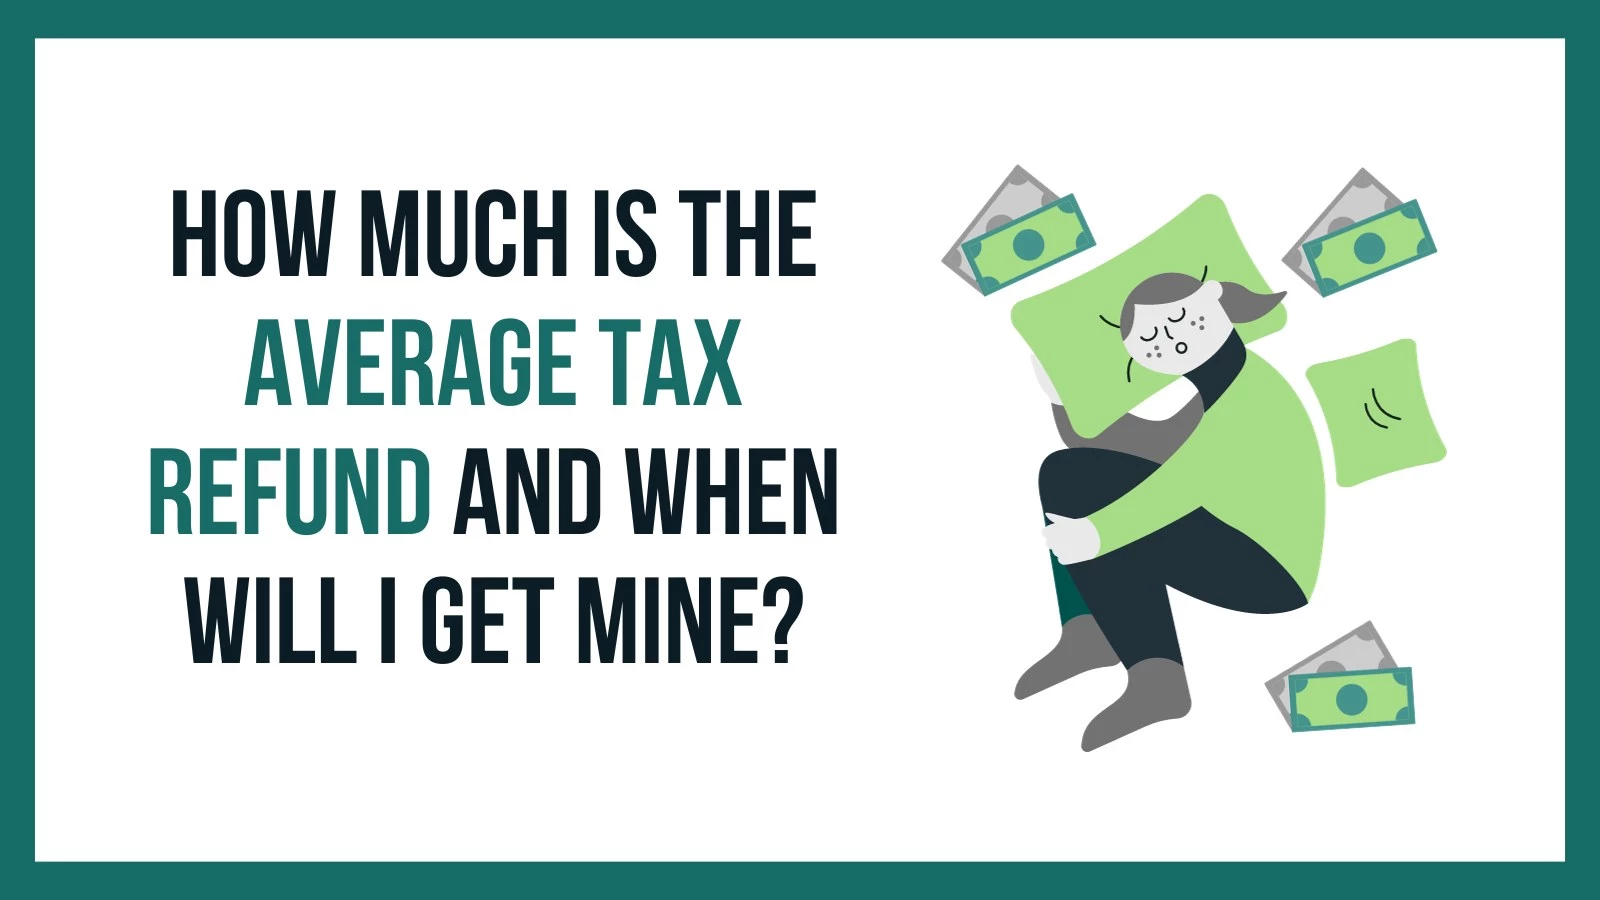 How Much Is the Average Tax Refund and When Will I Get Mine?